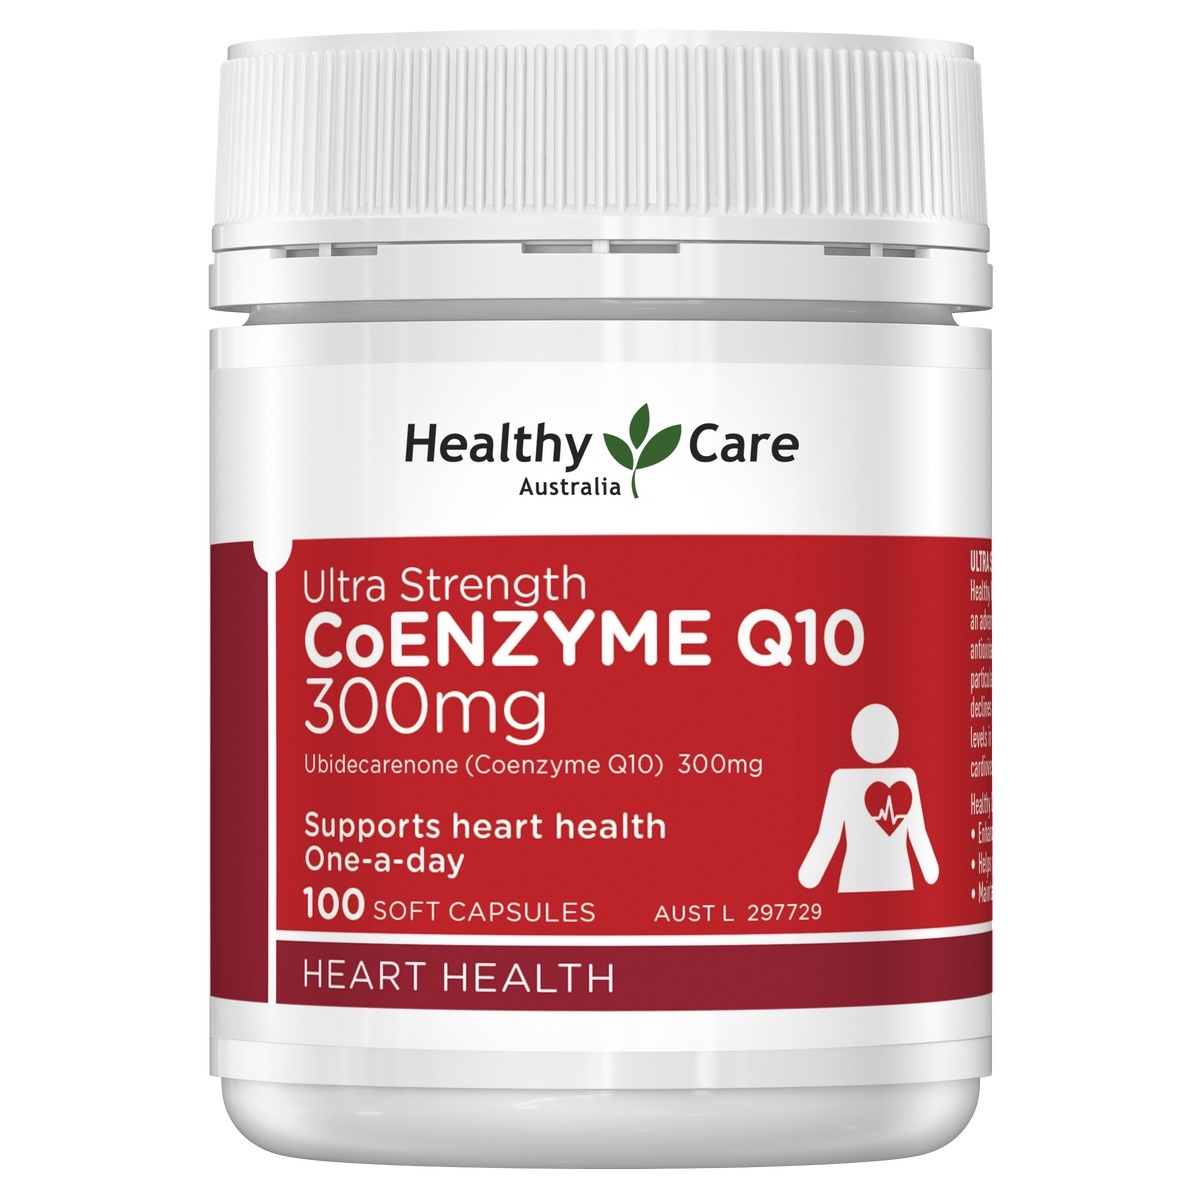 Healthy Care Ultra Strength Co Enzyme Q10 300mg - 100 Capsules